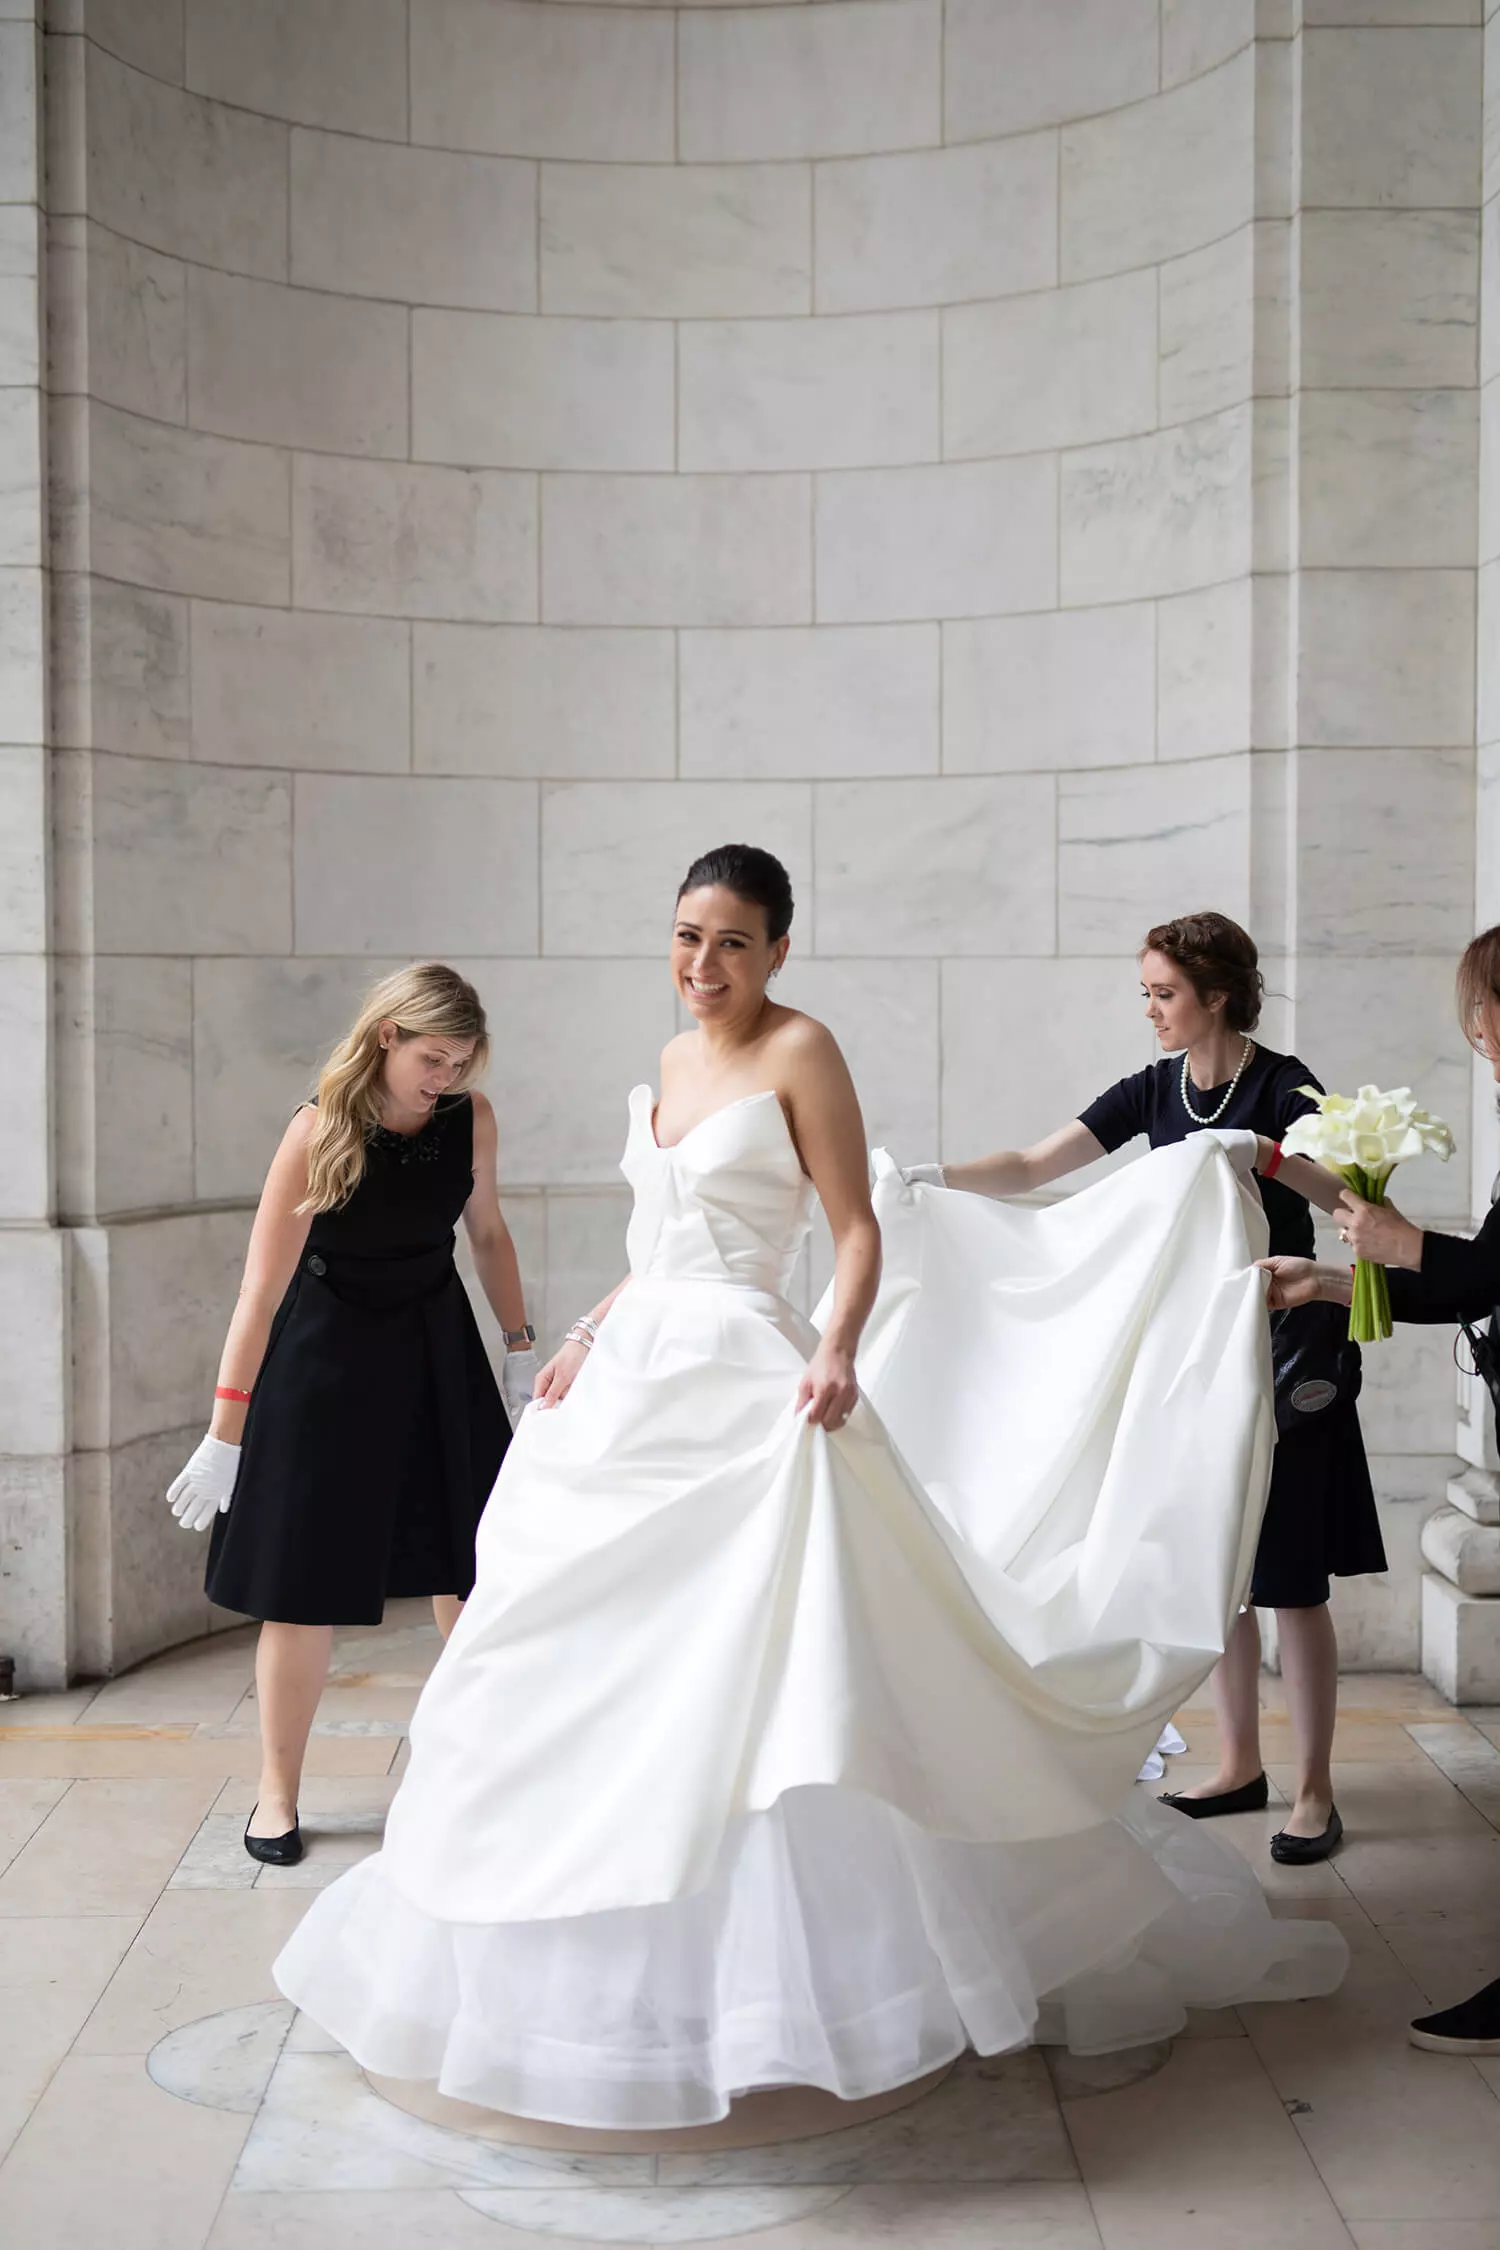 Your “Ladies-in-Waiting” take care of everything you need on your wedding day — from steaming the wedding dress to repairing broken zippers. Each stylist is trained and certified in The Stylish Bride® way.